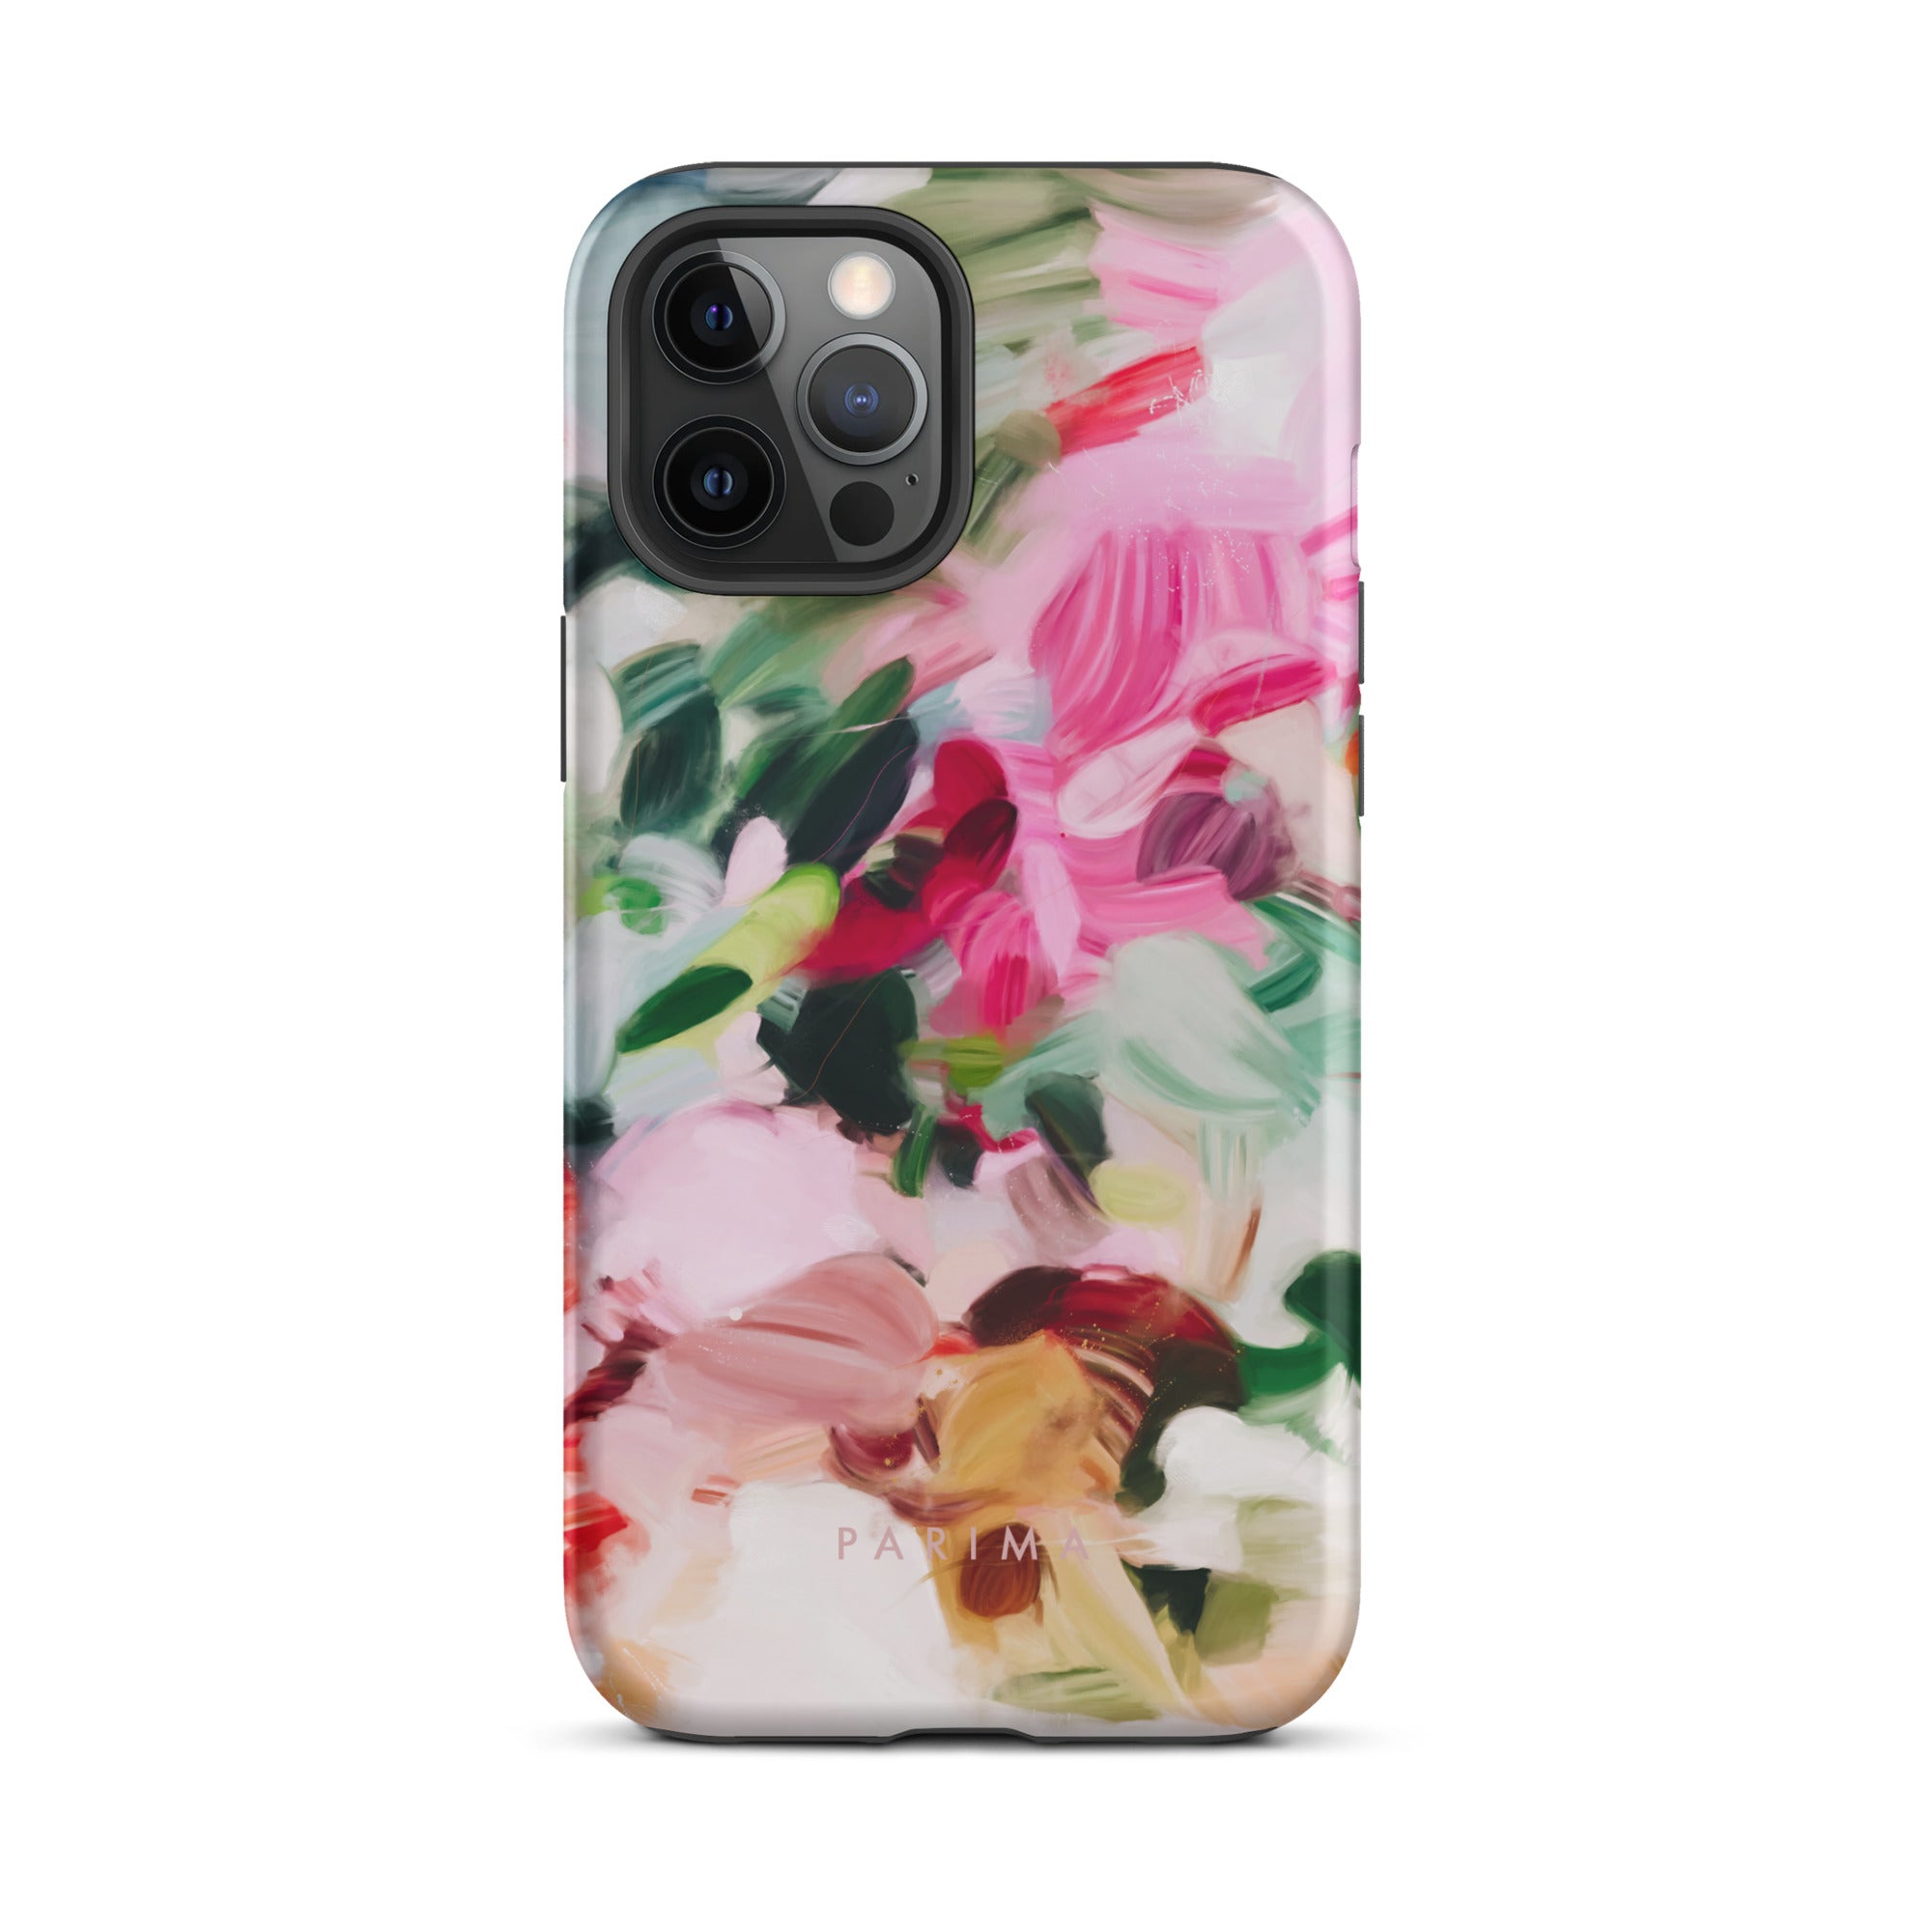 Bloom, pink and green abstract art - iPhone 12 Pro Max tough case by Parima Studio